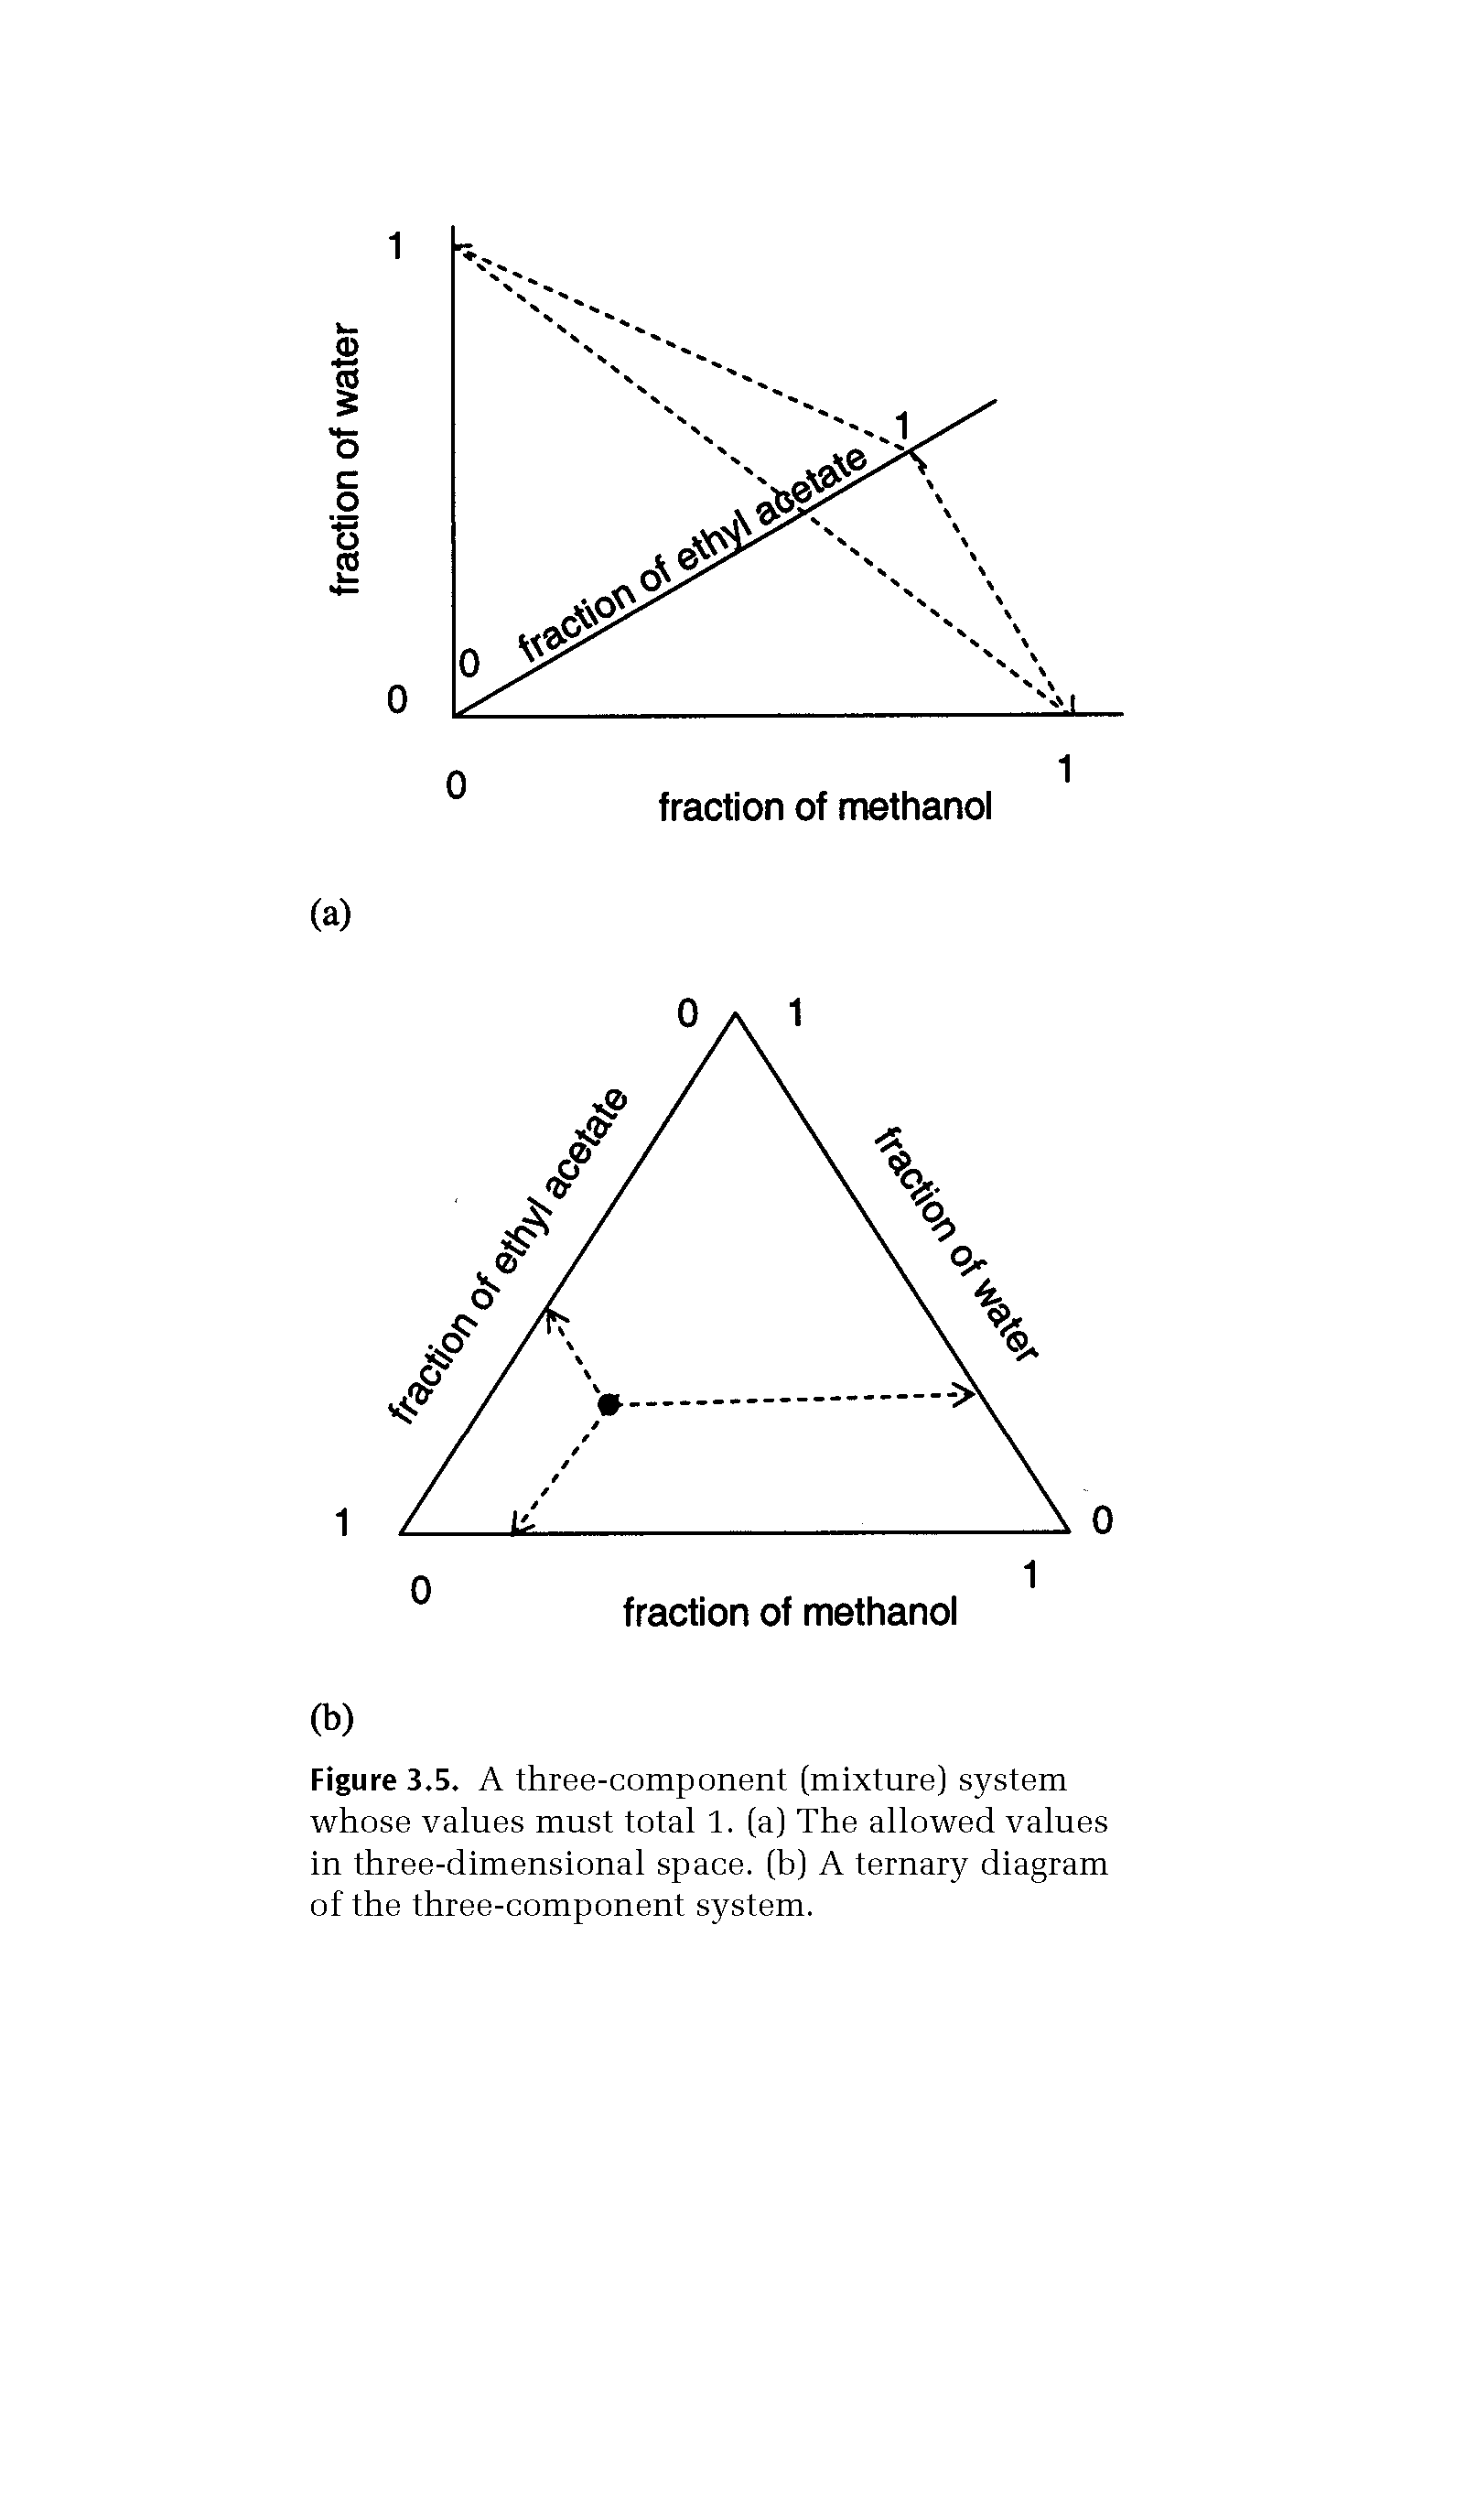 Figure 3.5. A three-component (mixture) system whose values must total 1. (a) The allowed values in three-dimensional space, (b) A ternary diagram of the three-component system.